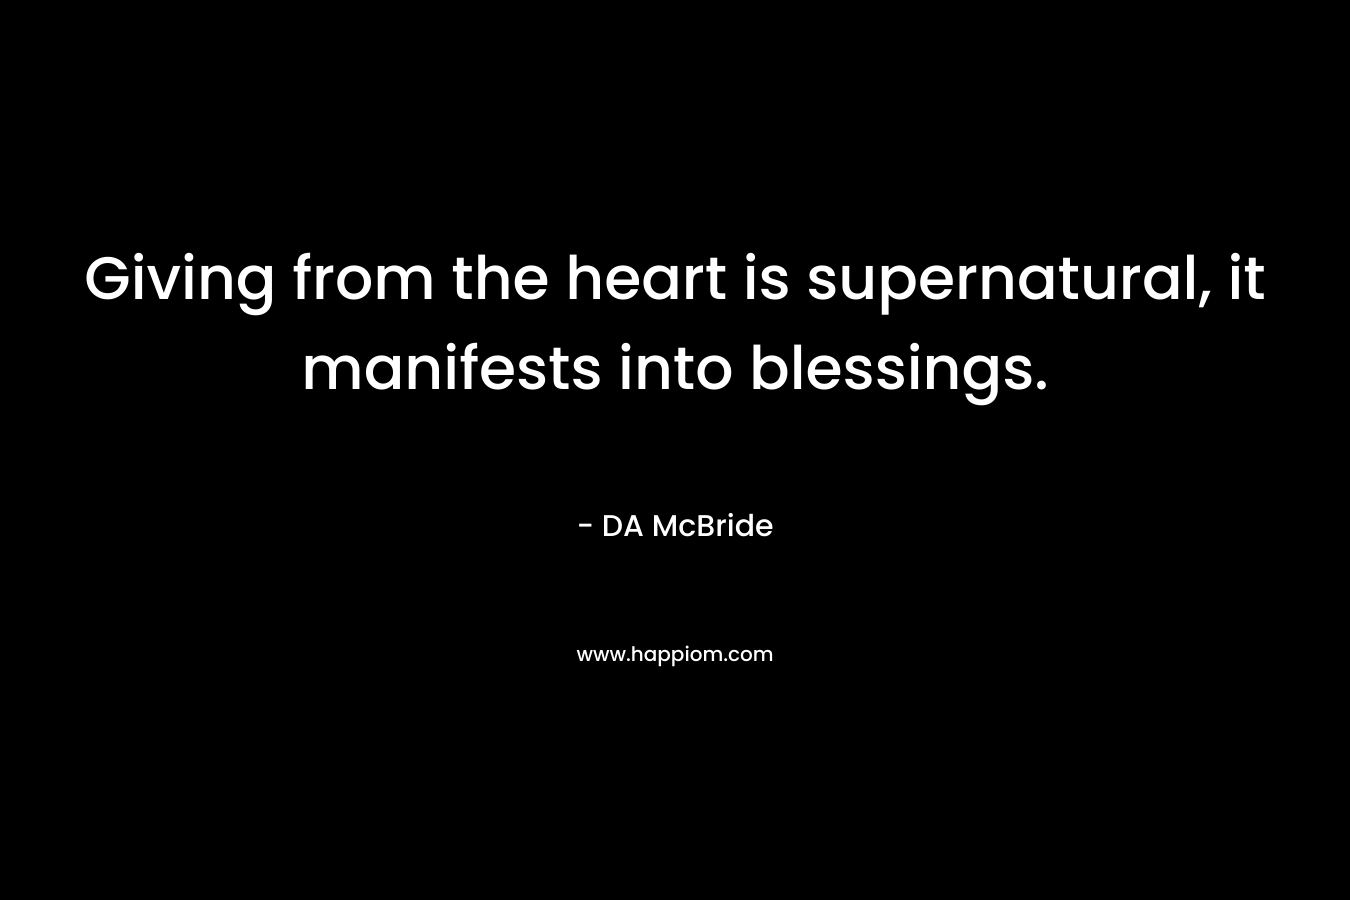 Giving from the heart is supernatural, it manifests into blessings. – DA McBride